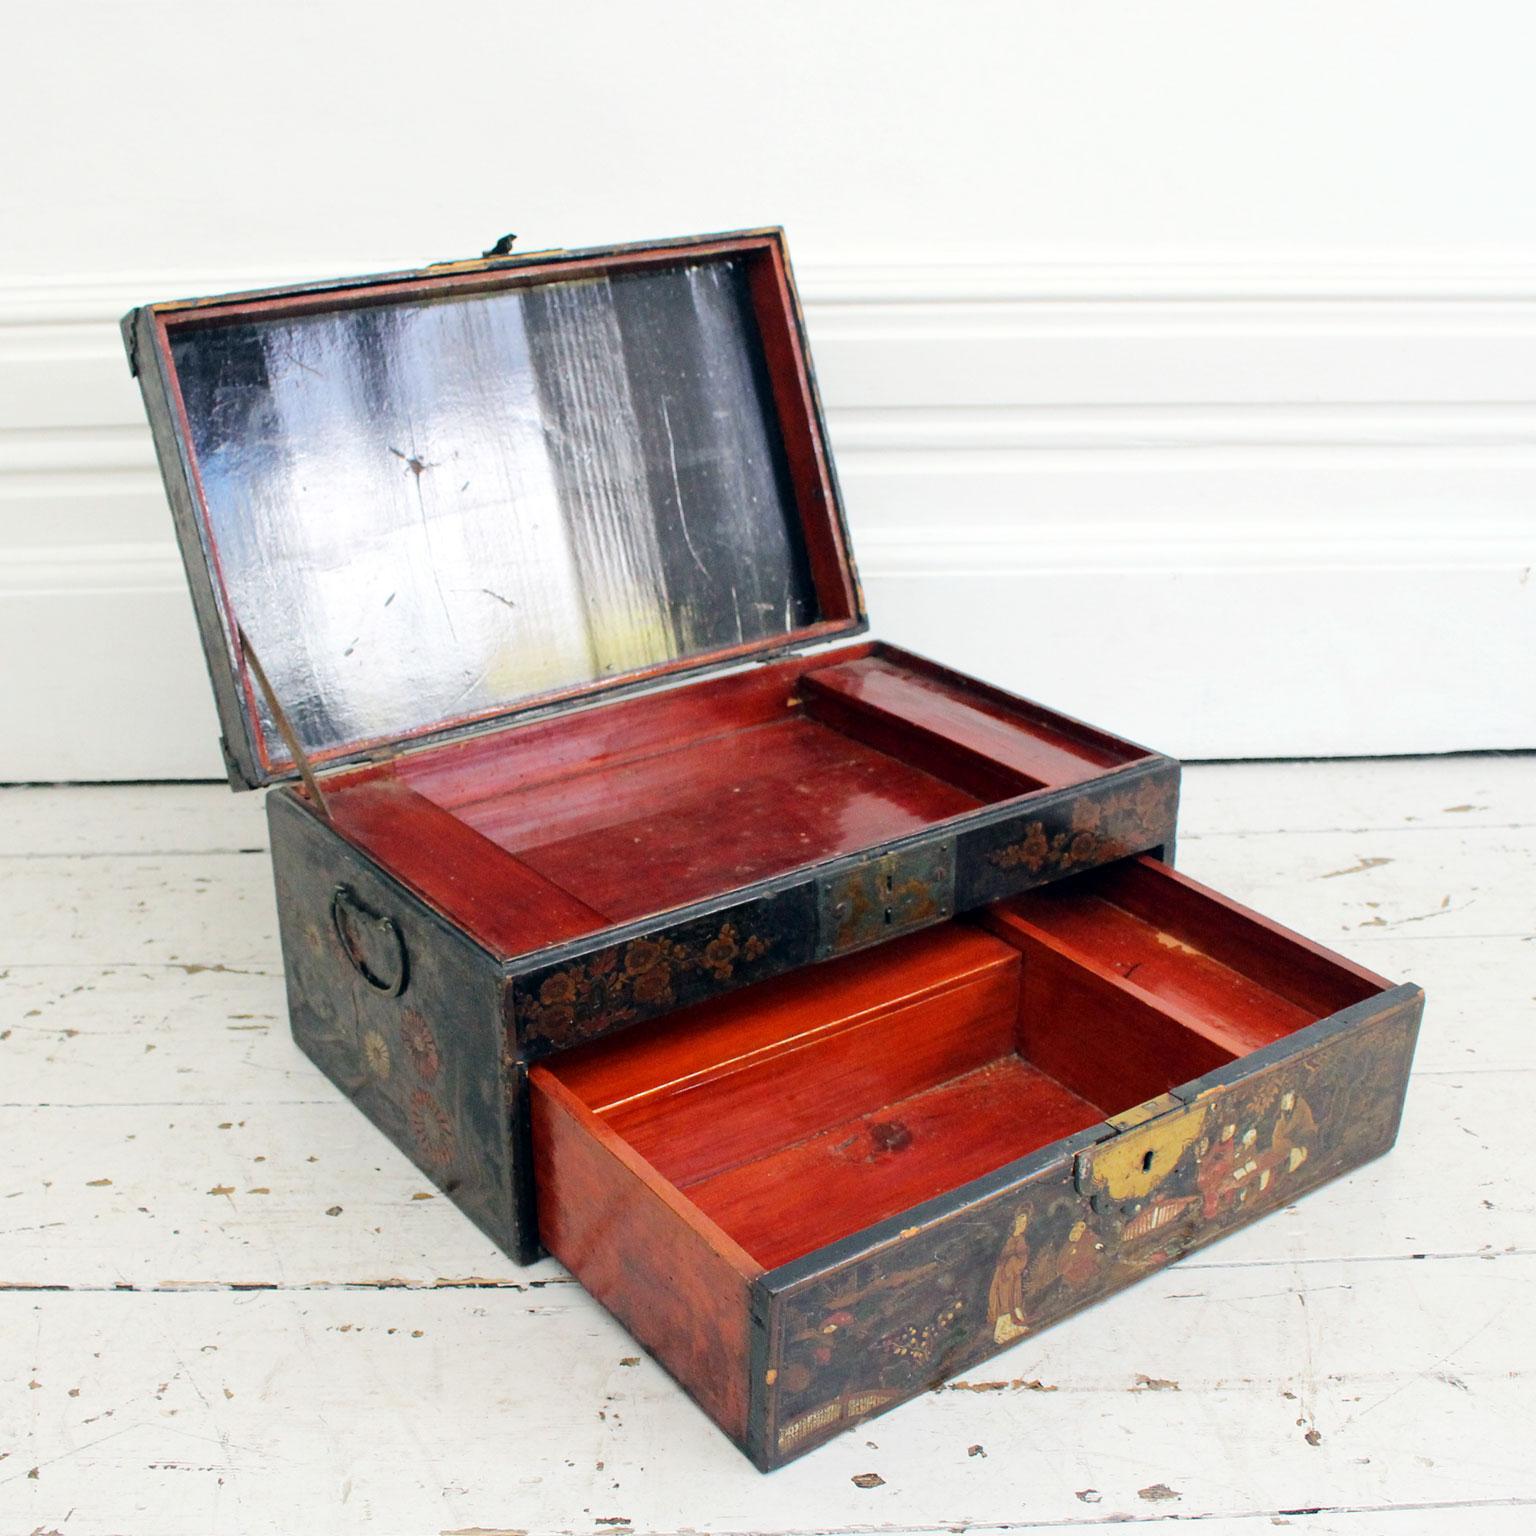 This beautiful chinoiserie box is in incredible original condition. It is decorated on all sides with chinoiserie gilt decoration and has carrying handles. The interior, which has several compartments, is dark red lacquer. At the back of the